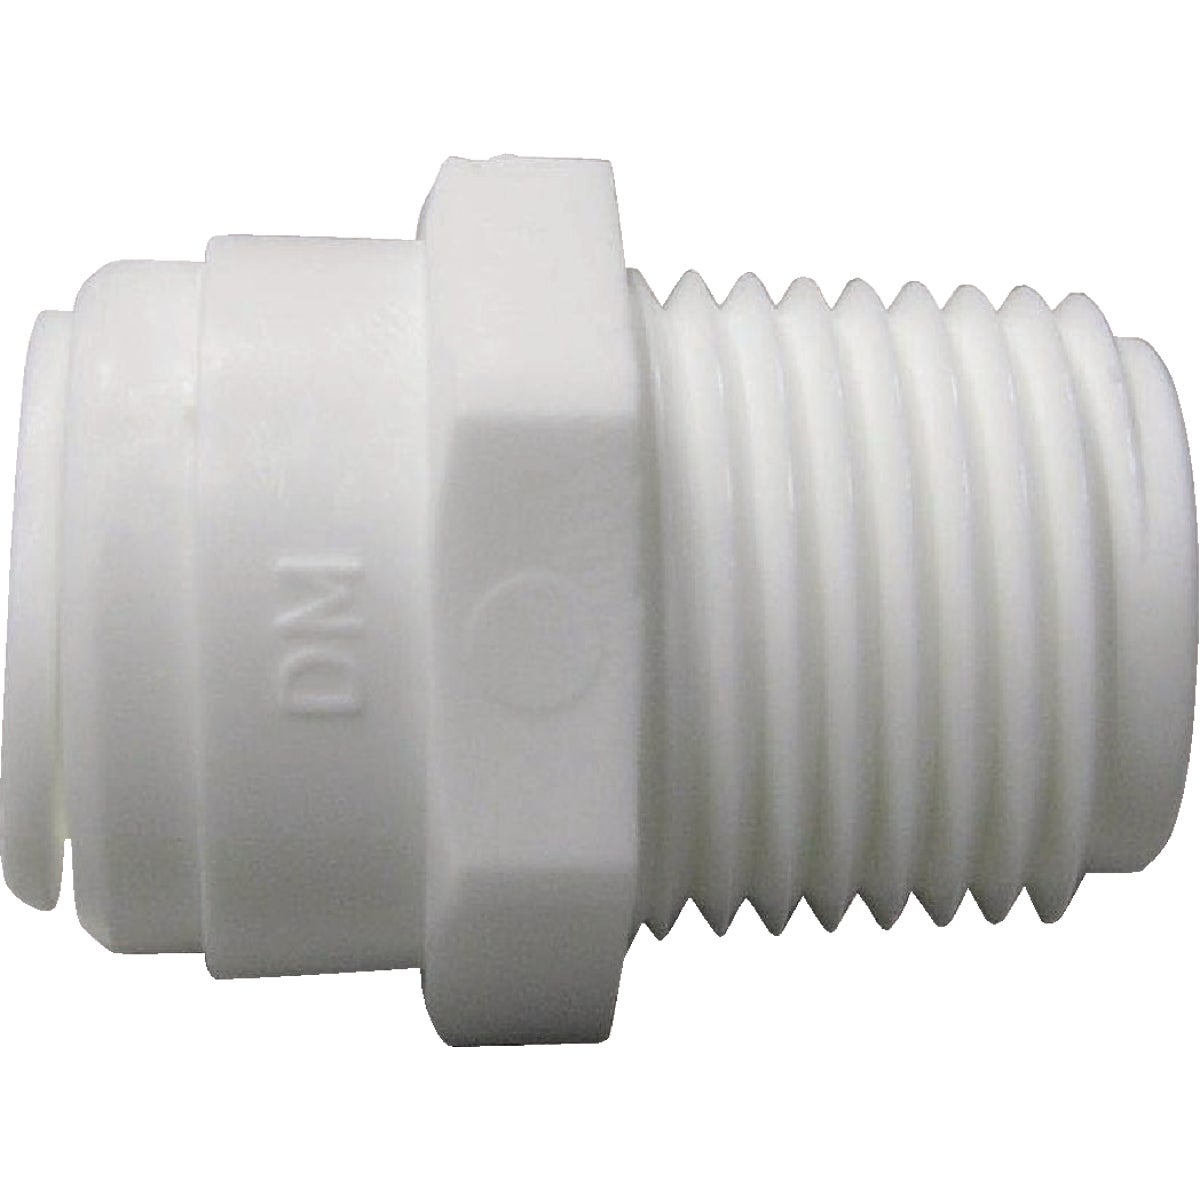 Watts Aqualock 1/2 In. OD x 1/2 In. MPT Push-to-Connect Plastic Adapter